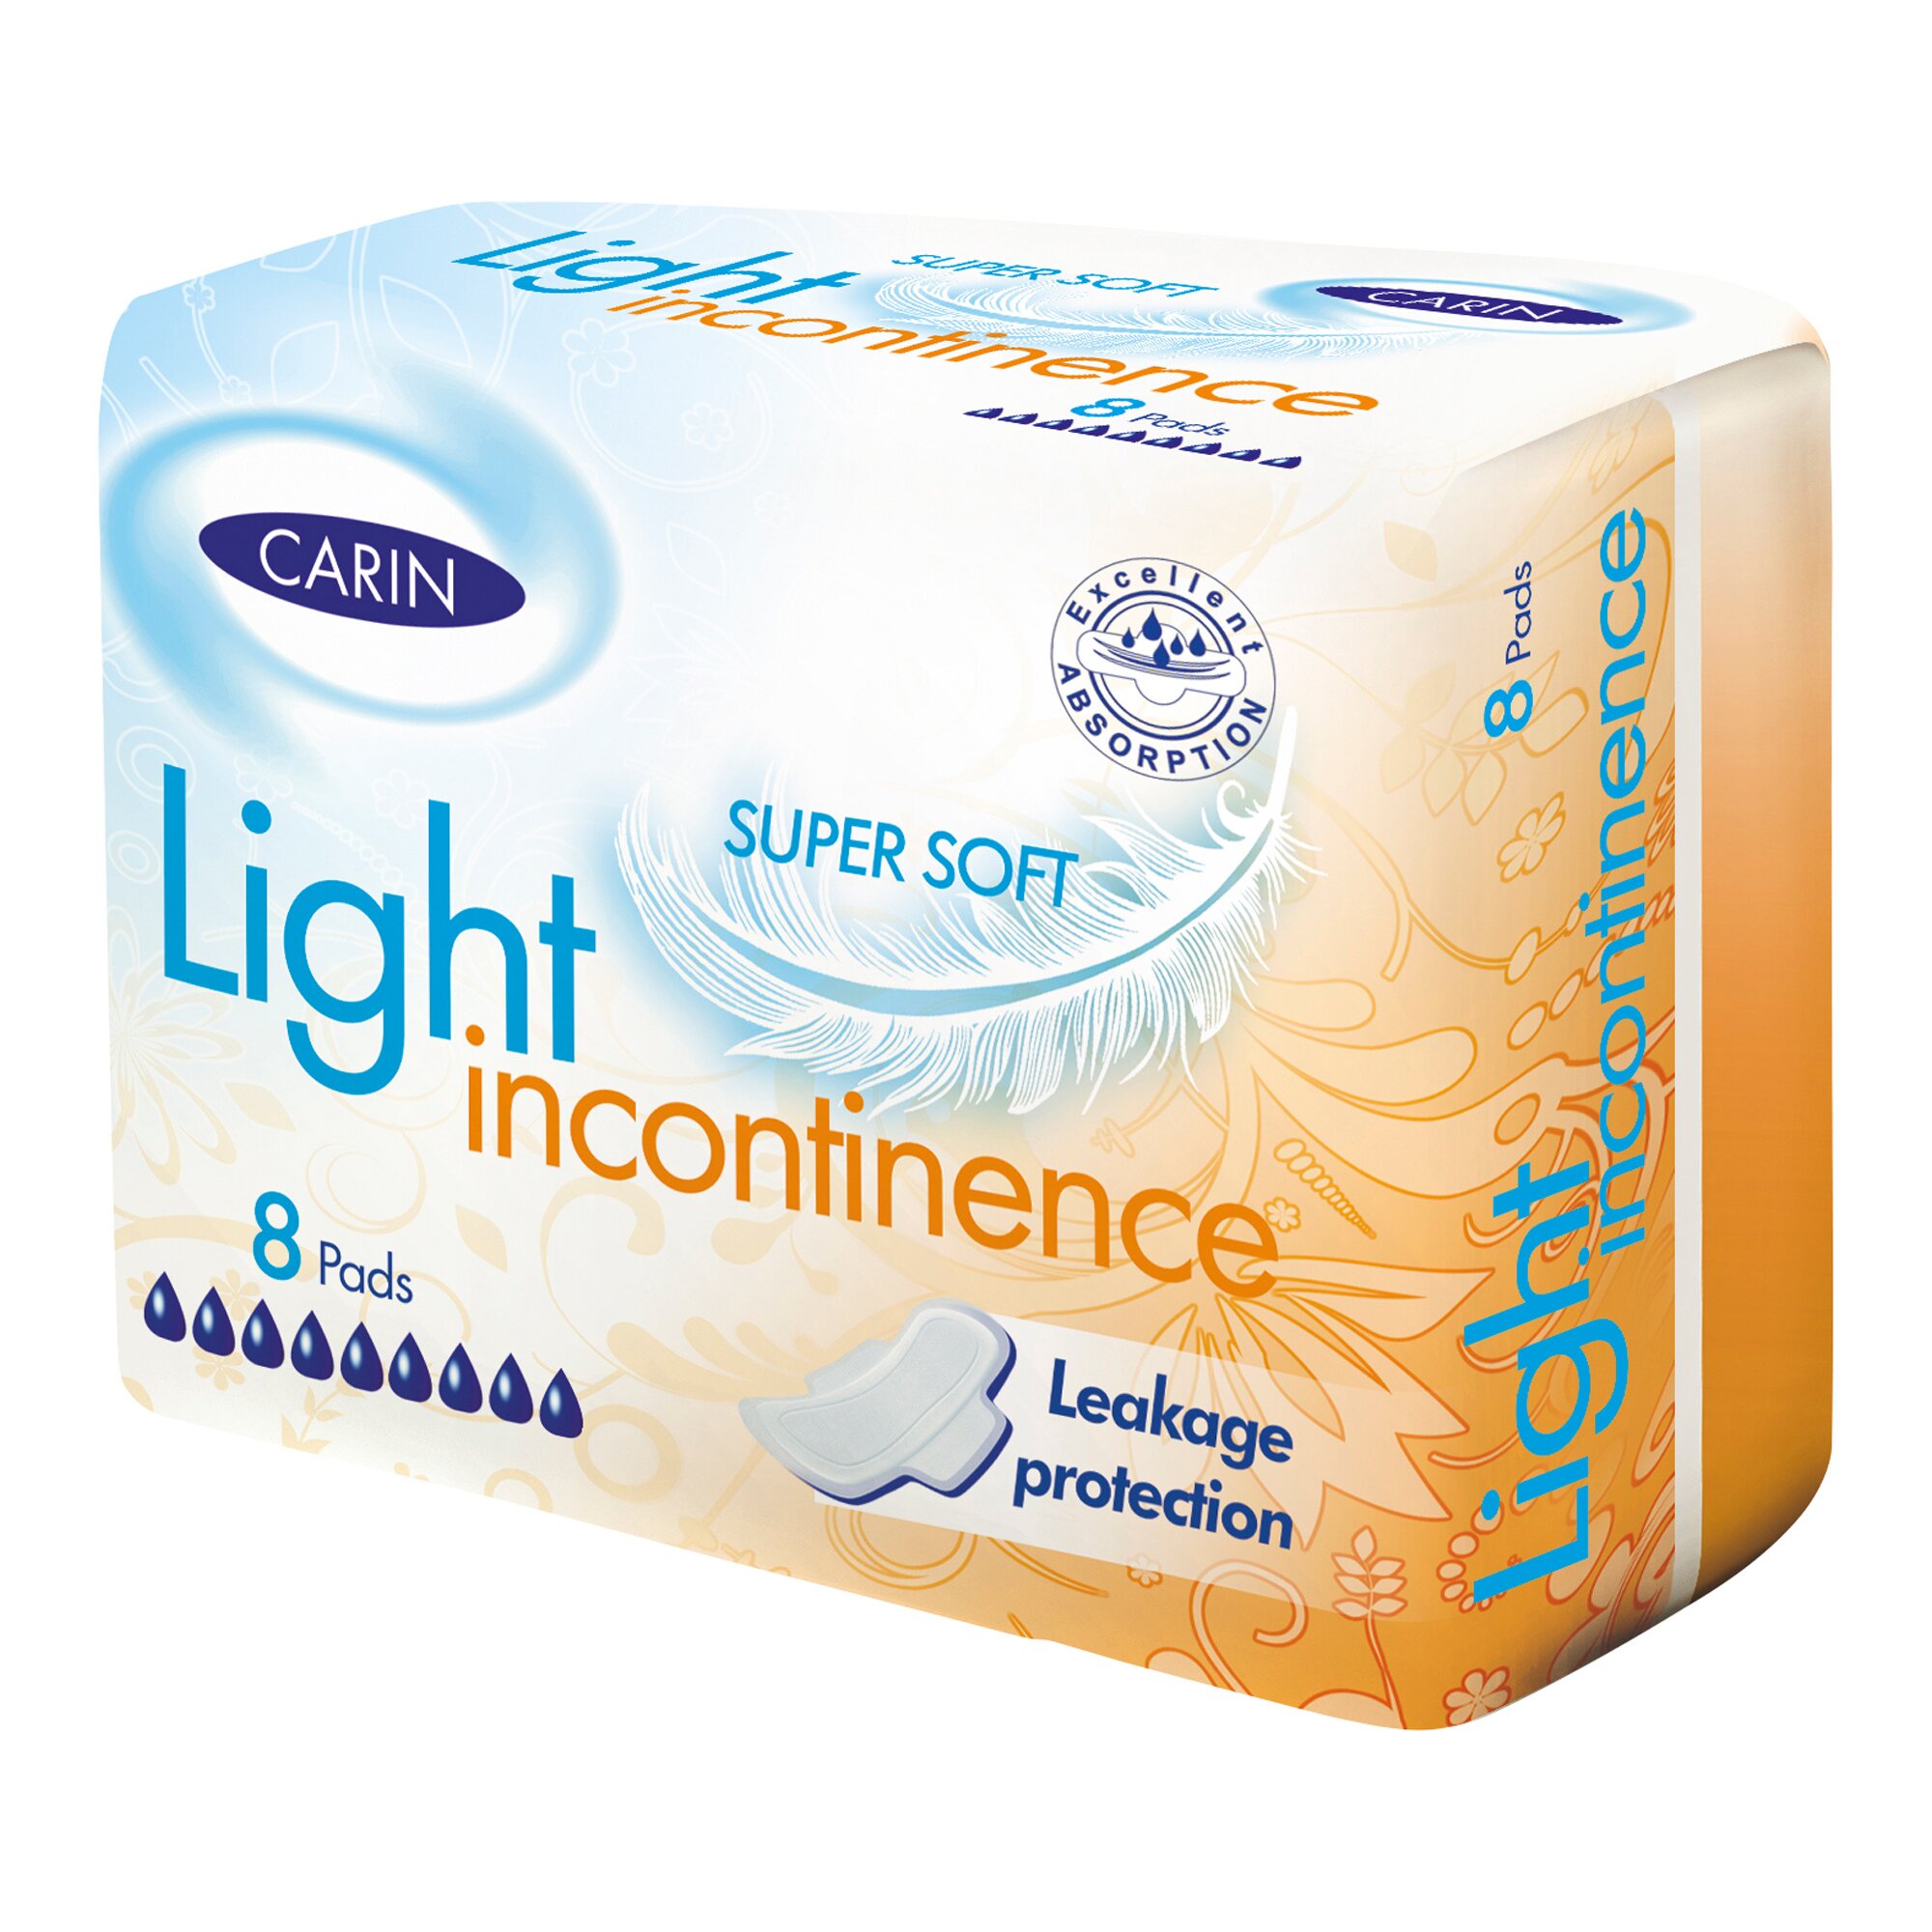 Protections féminines incontinence « Carin Light »